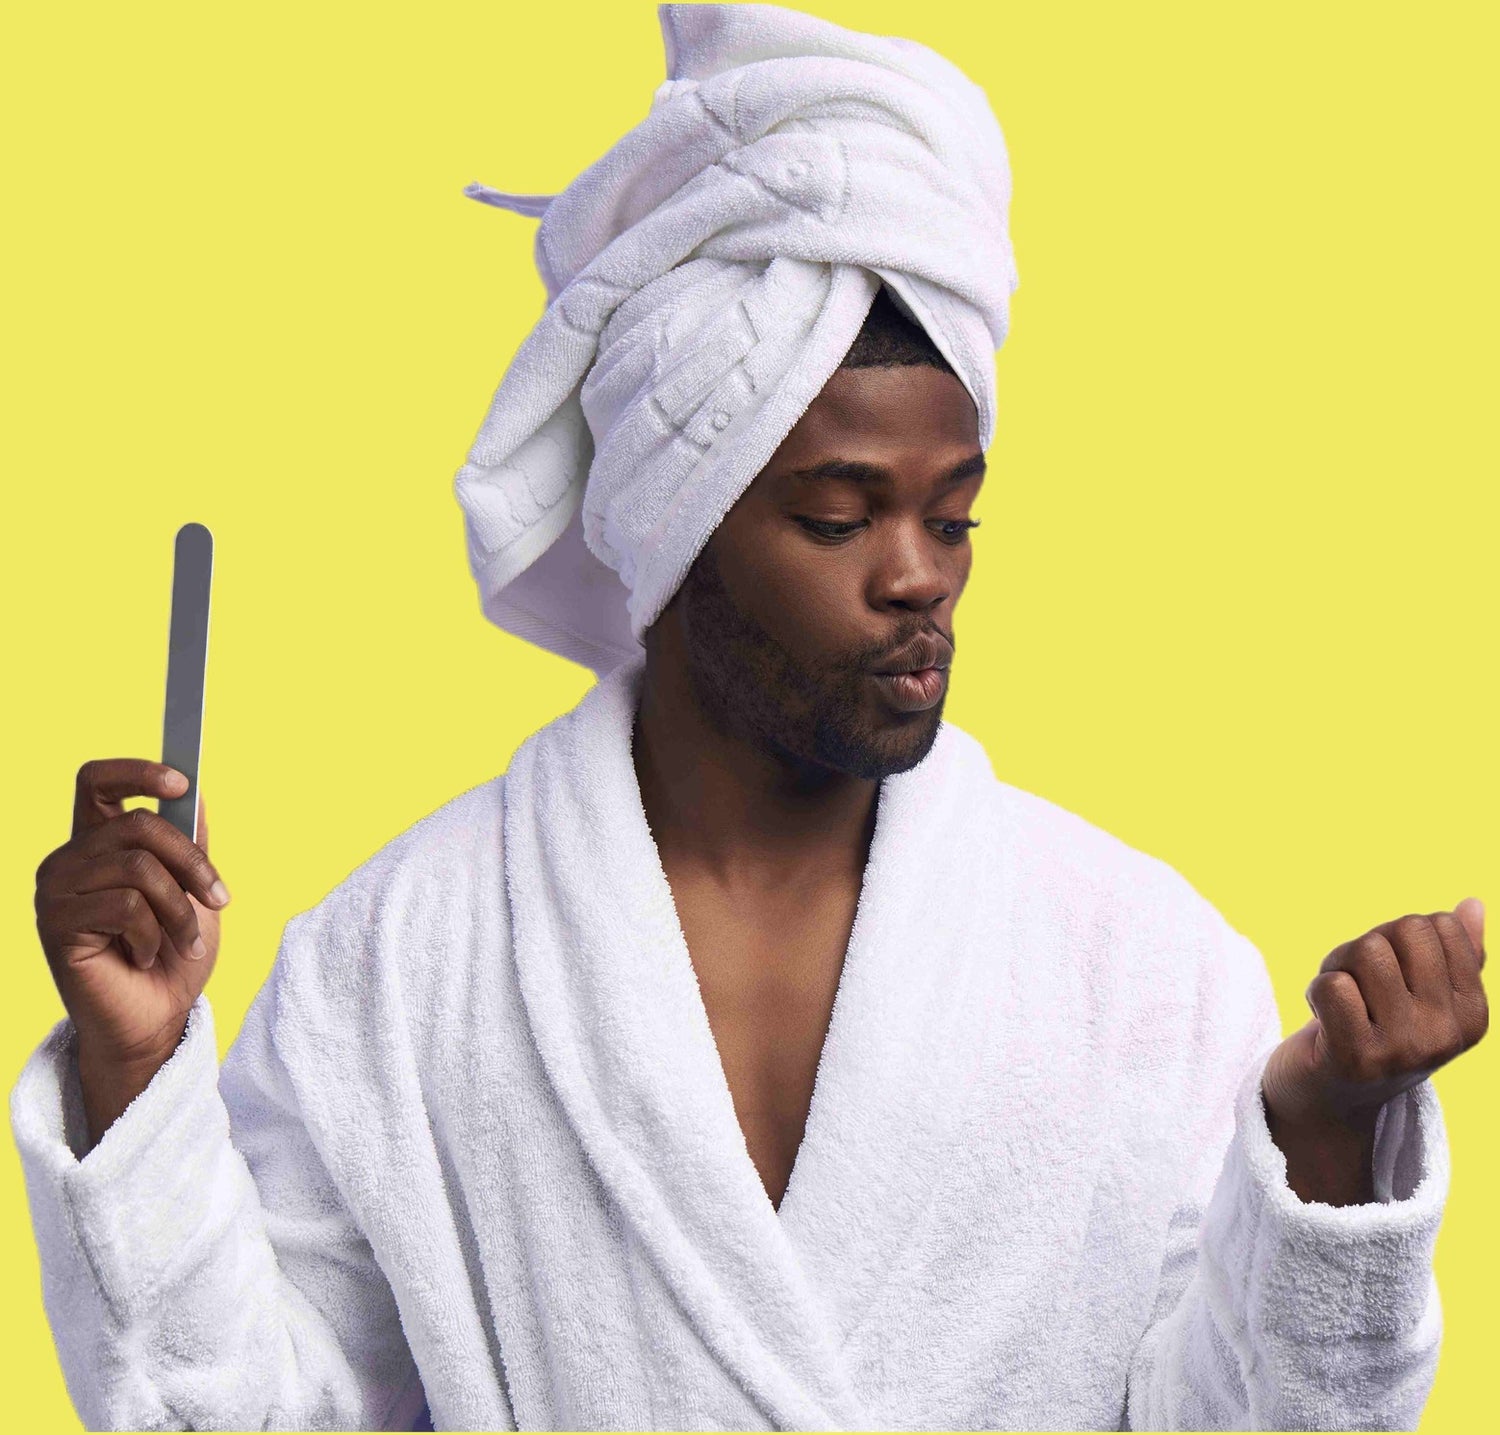 Black man with a white towel on his head and wearing white gown showing off his manicure at home, looking at his natural nails.